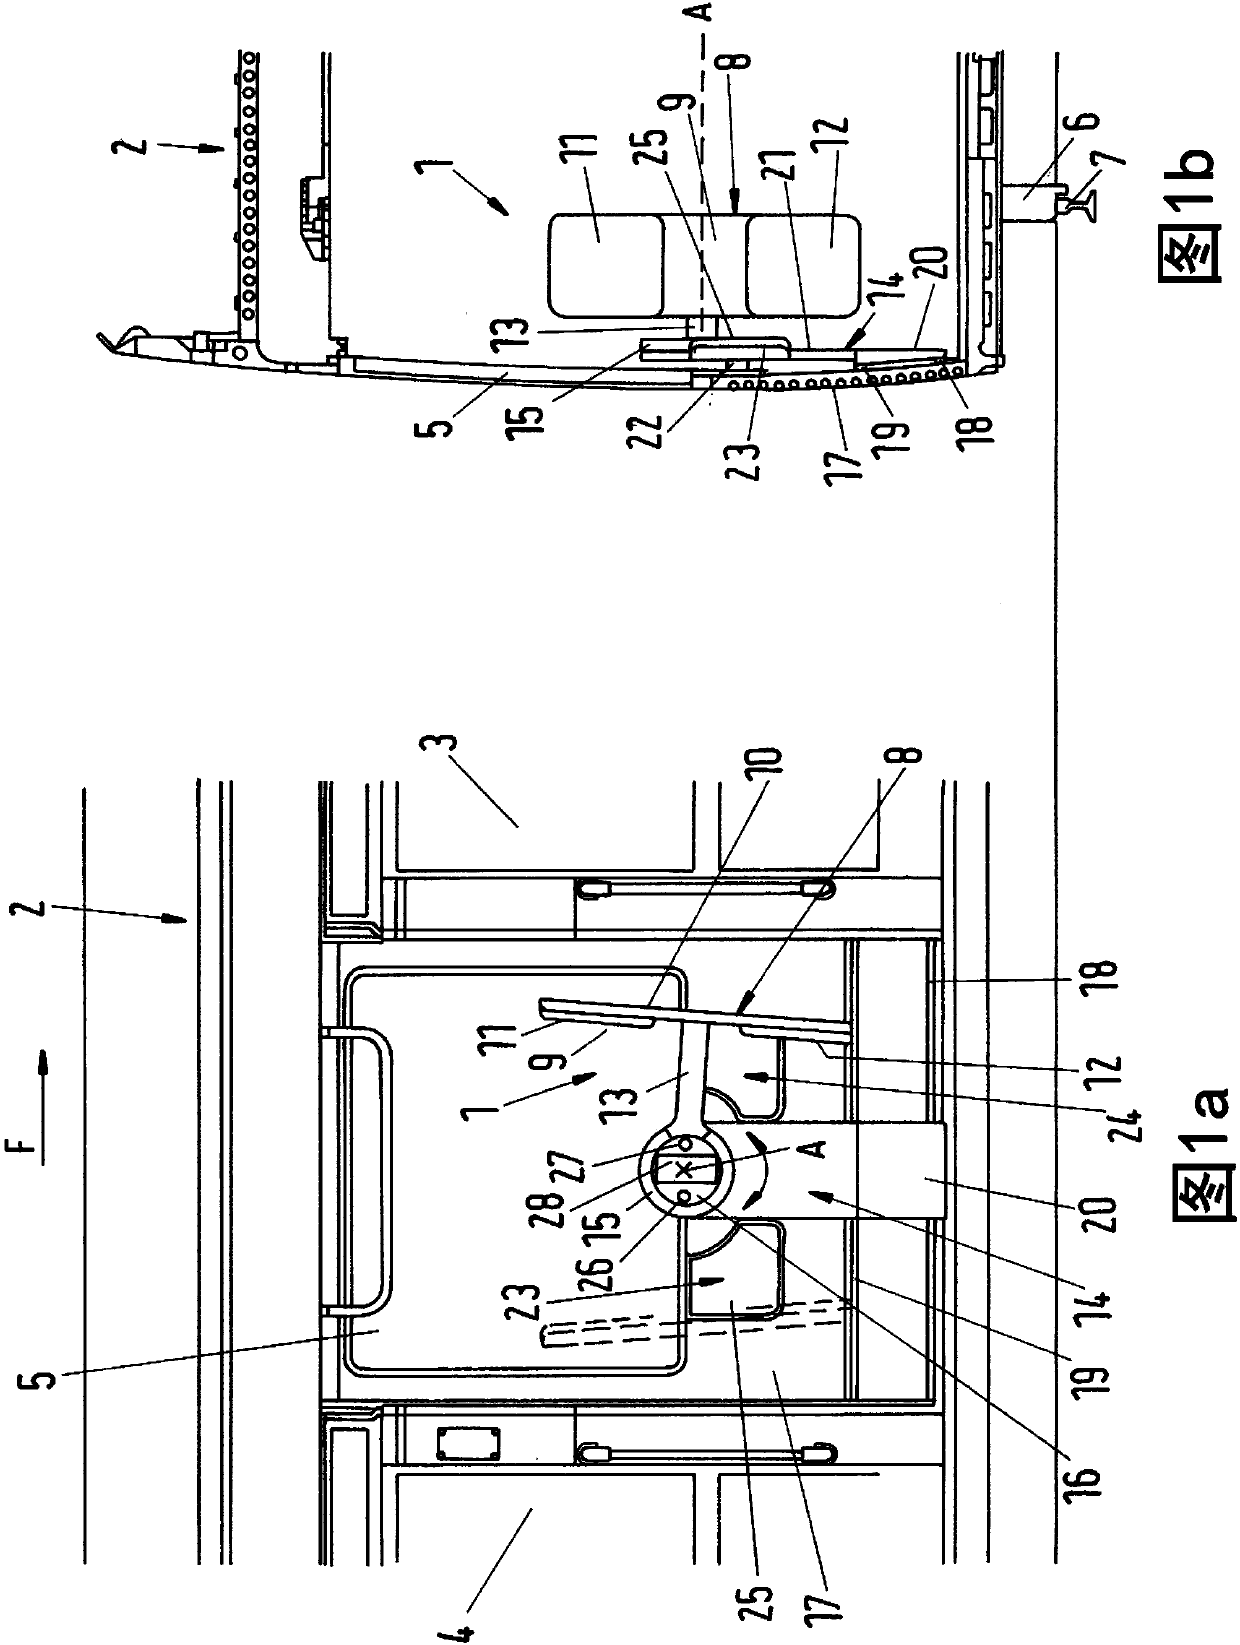 Deflector plate device for a public transport vehicle